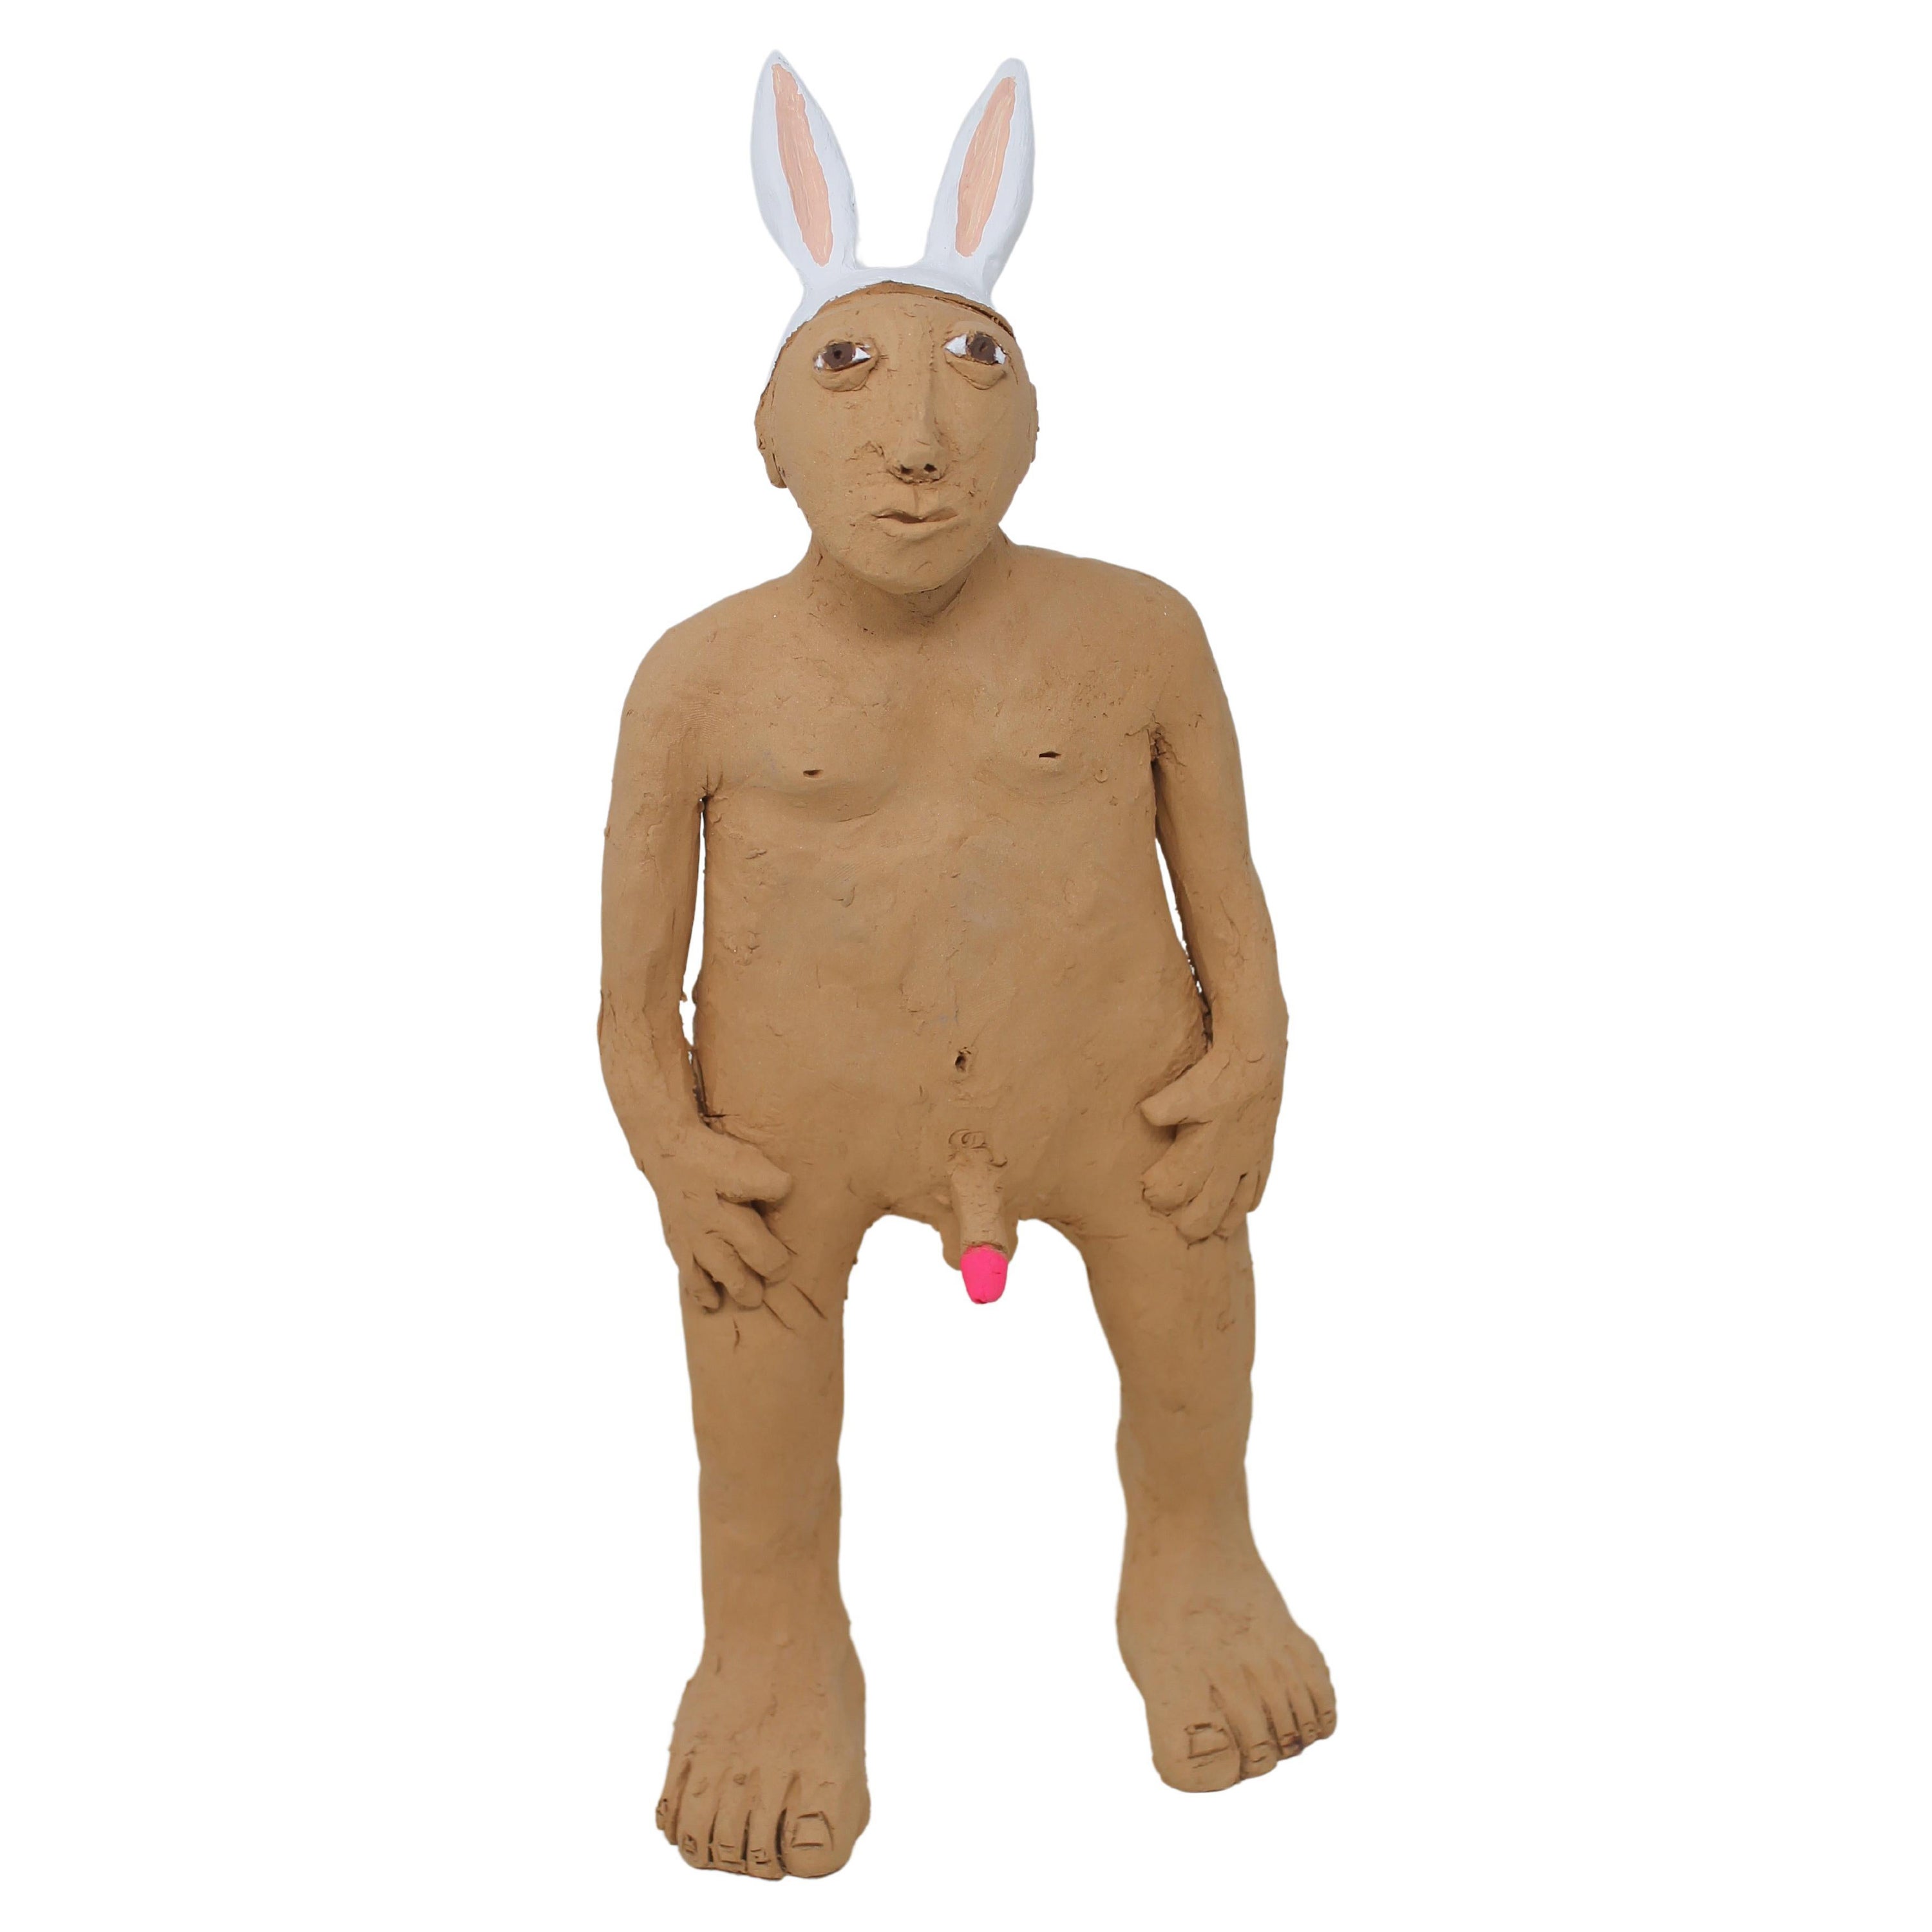 Freaklab Big Humans Made Entirely by Hand in Terracotta, Man-Rabbit